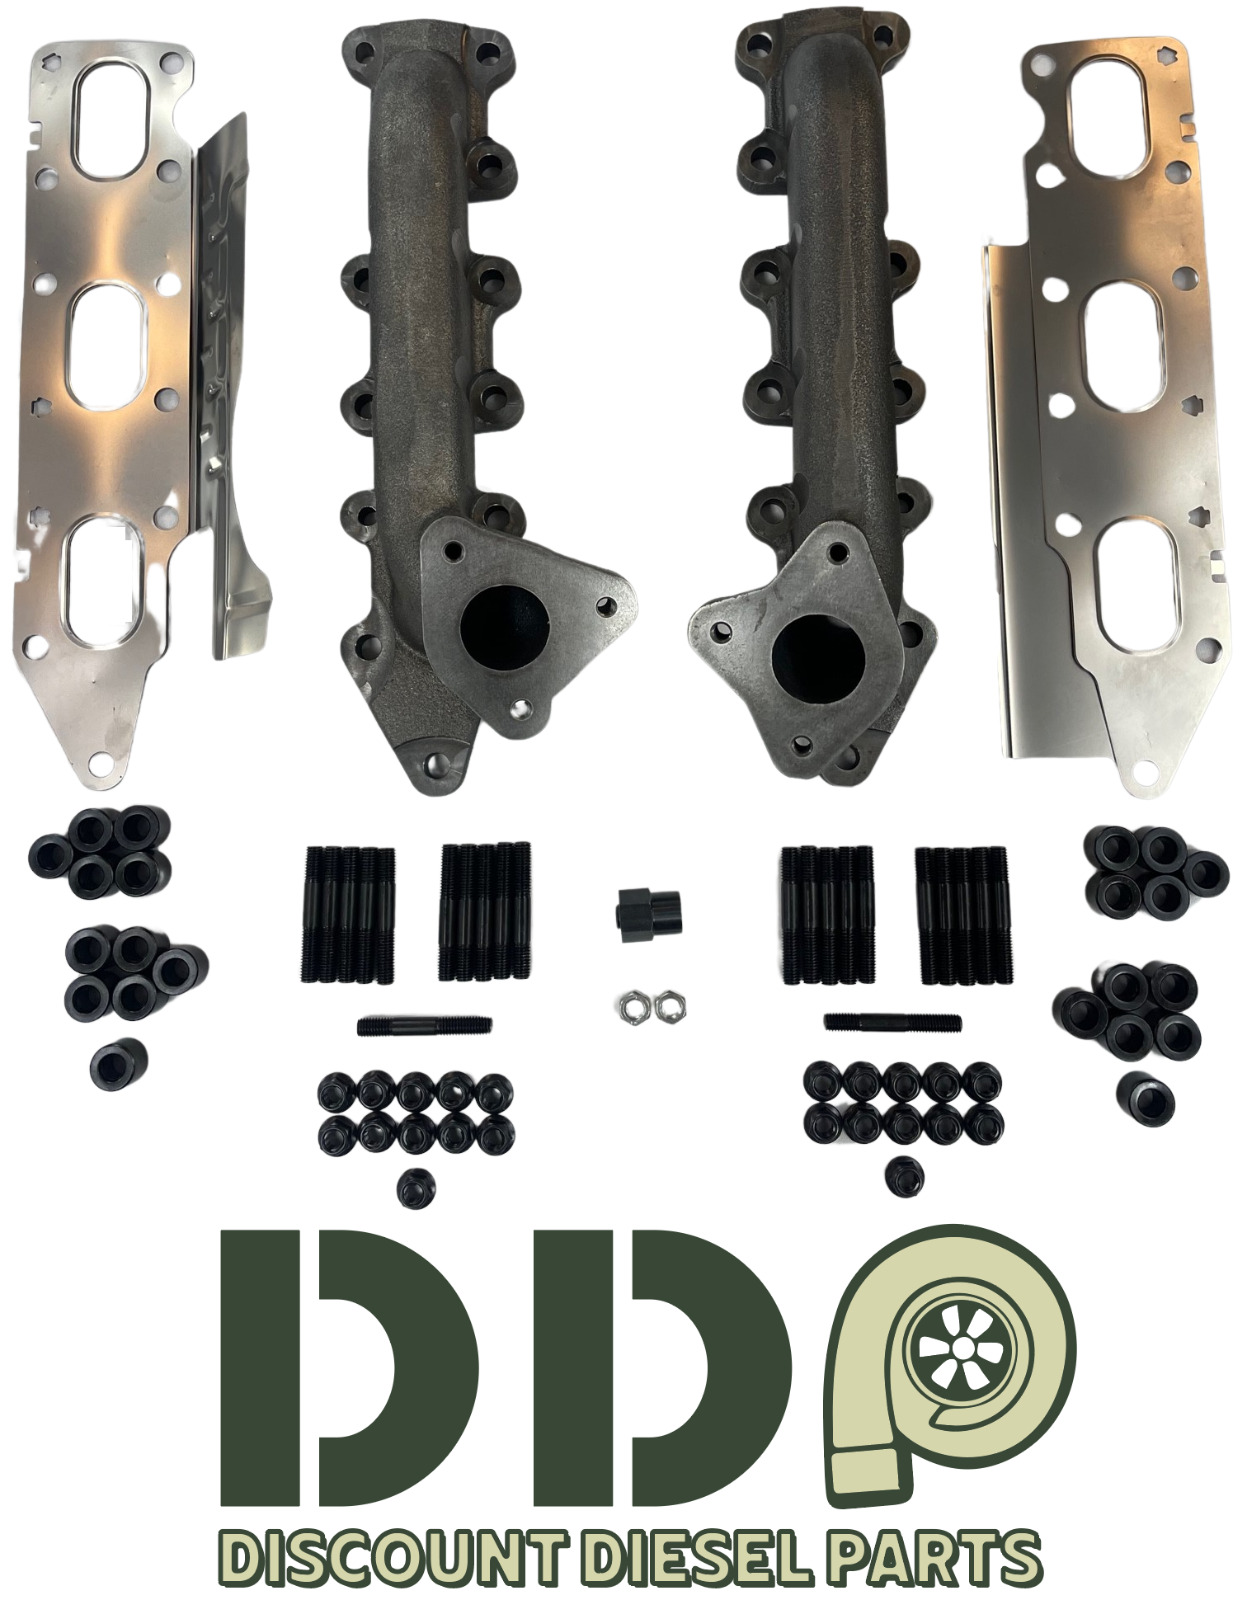 Upgraded Exhaust Manifold Kit For 11-16 Ford F-150 / Expedition 3.5L Ecoboost